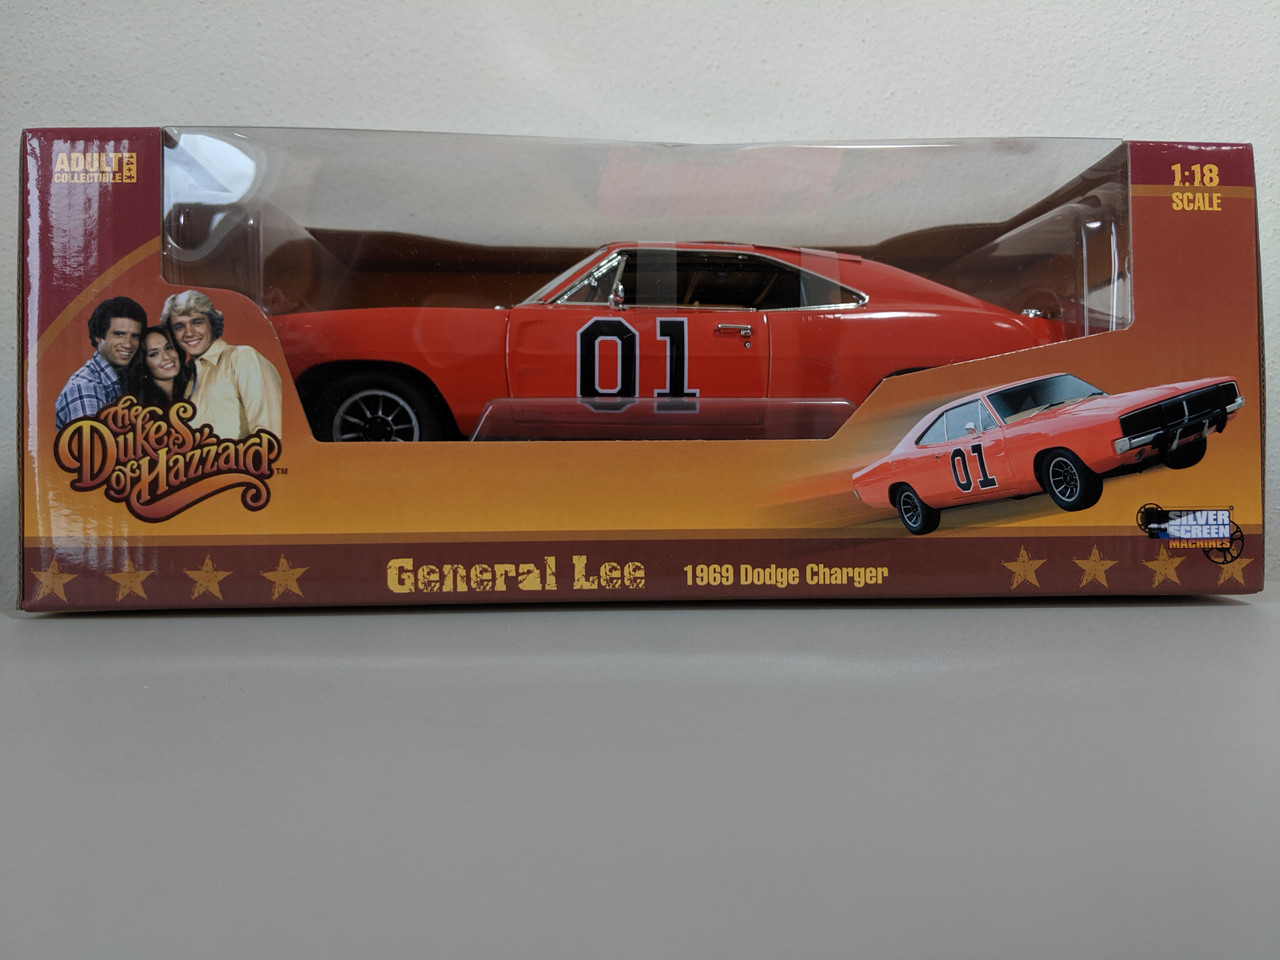 1:18 Dukes of Hazzard General Lee 1969 Dodge Charger by Auto World - Town  and Country Toys